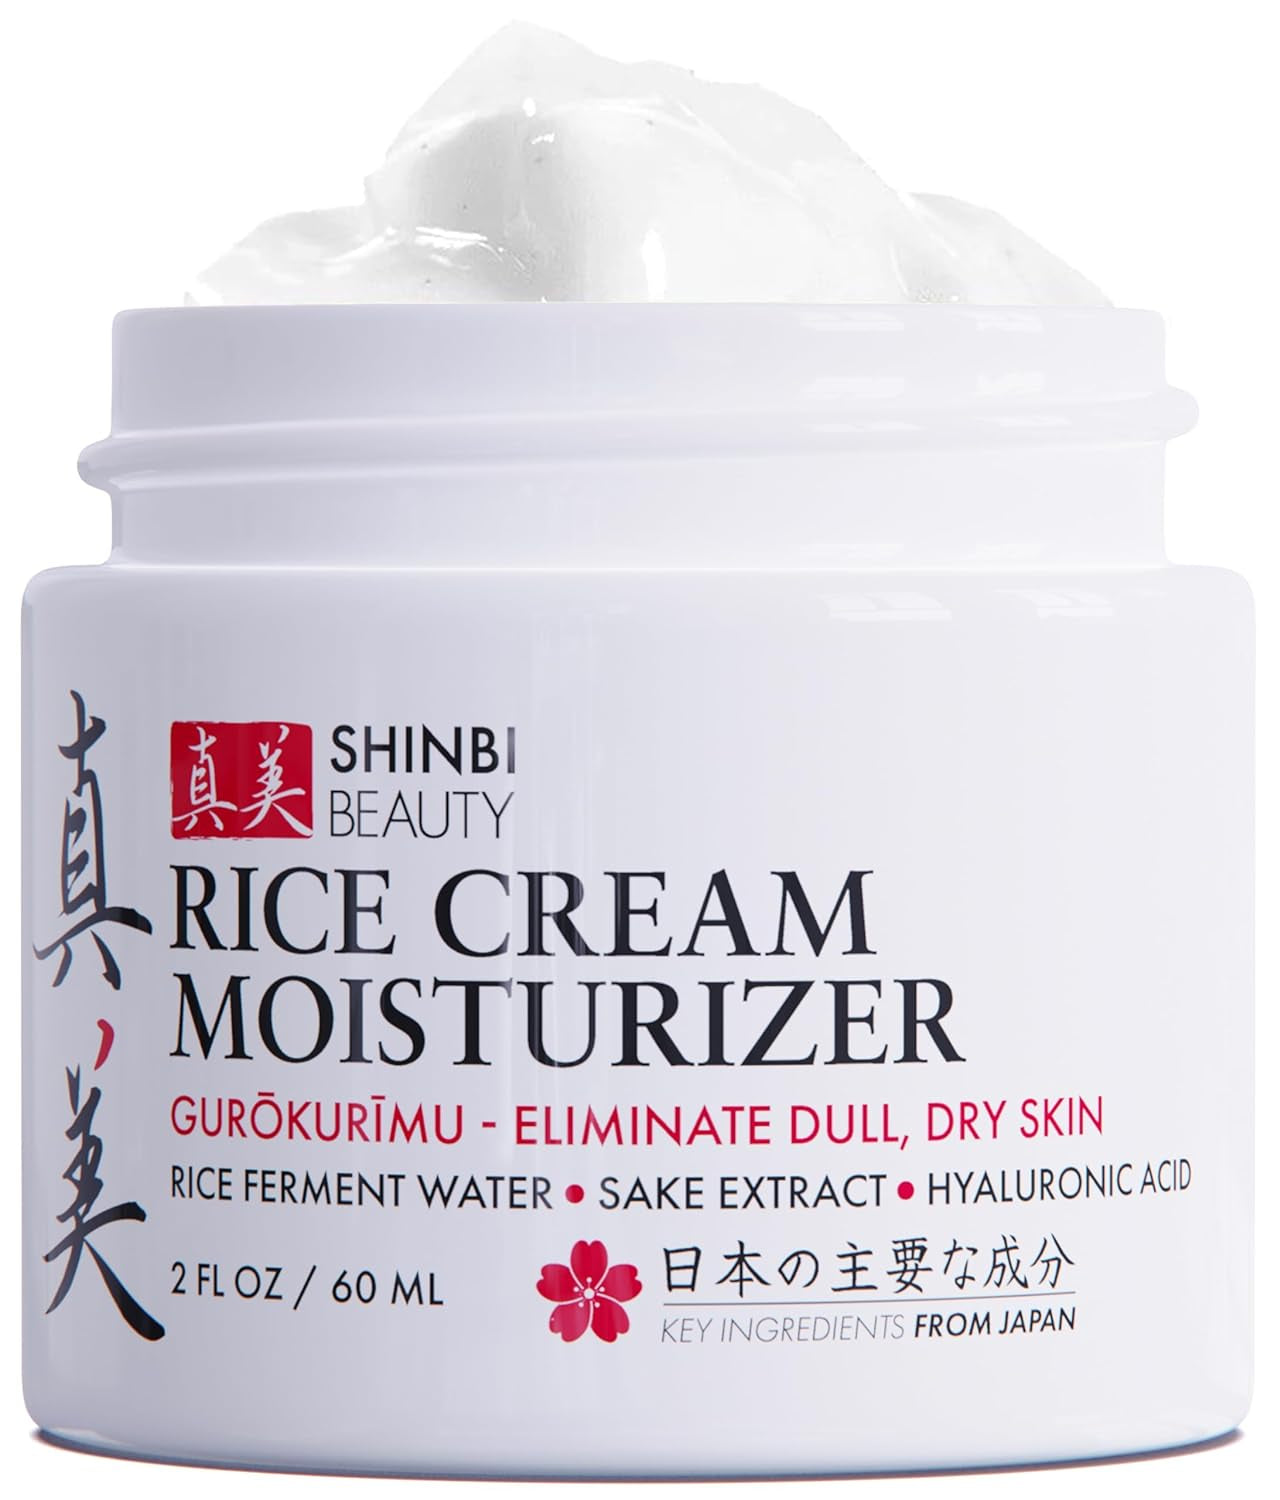 Shinbi Beauty Japanese Skincare Moisturizer for Face - Rice Cream with Rice Ferment + Sake Extract - J Beauty Natural Asian Skincare Products 2Oz